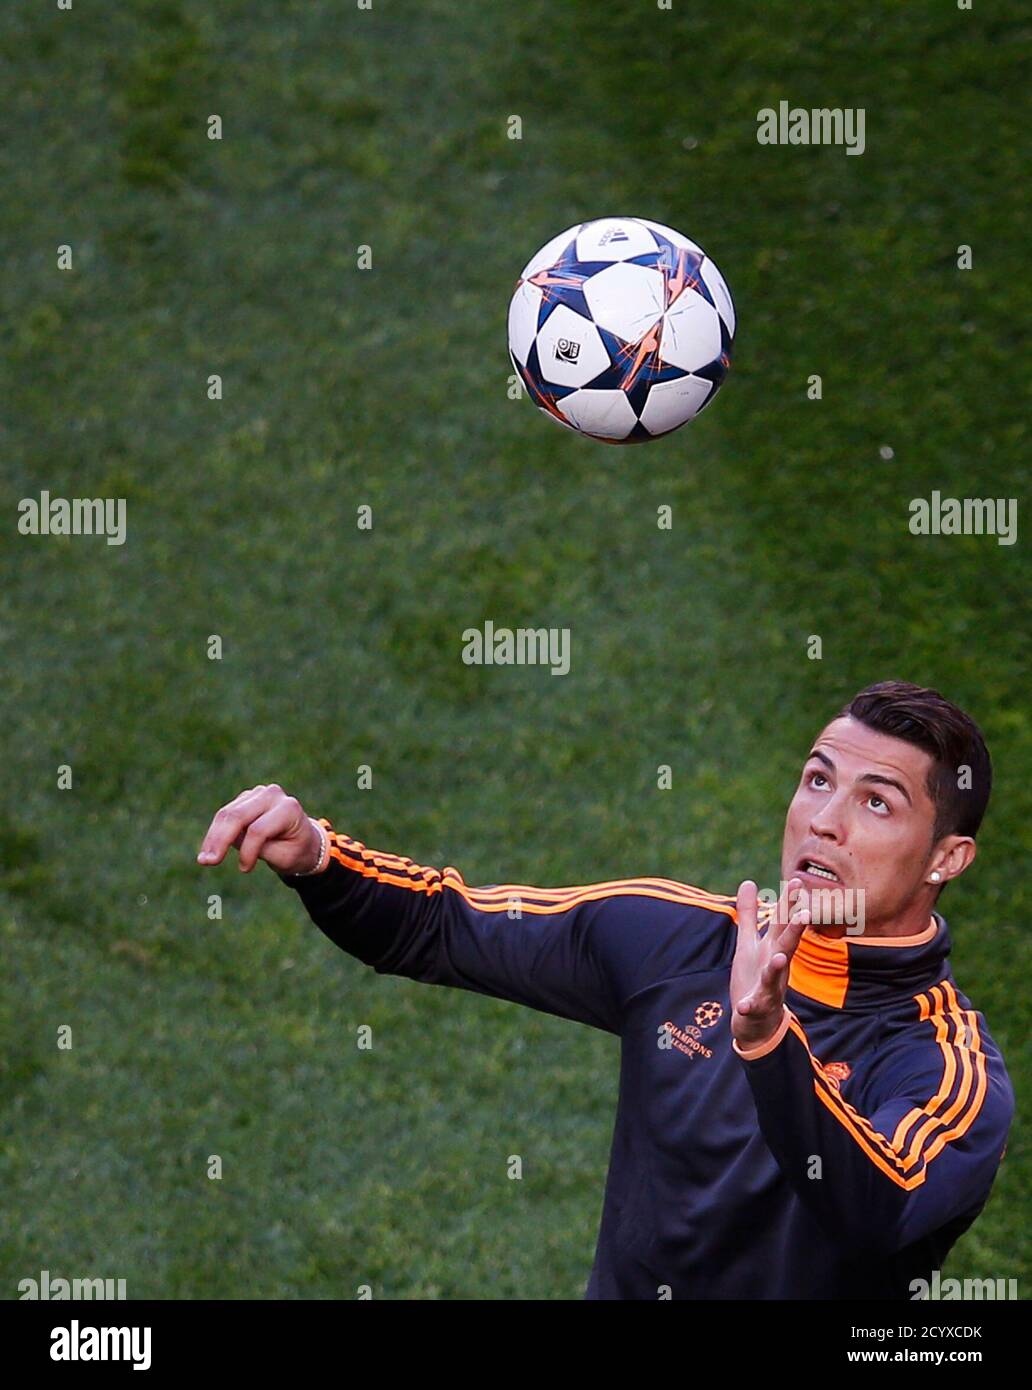 Real Madrid's Cristiano Ronaldo prepares to head a ball during a training  session ahead of the Champions League soccer final at Luz stadium in Lisbon  May 23, 2014. Real Madrid will face